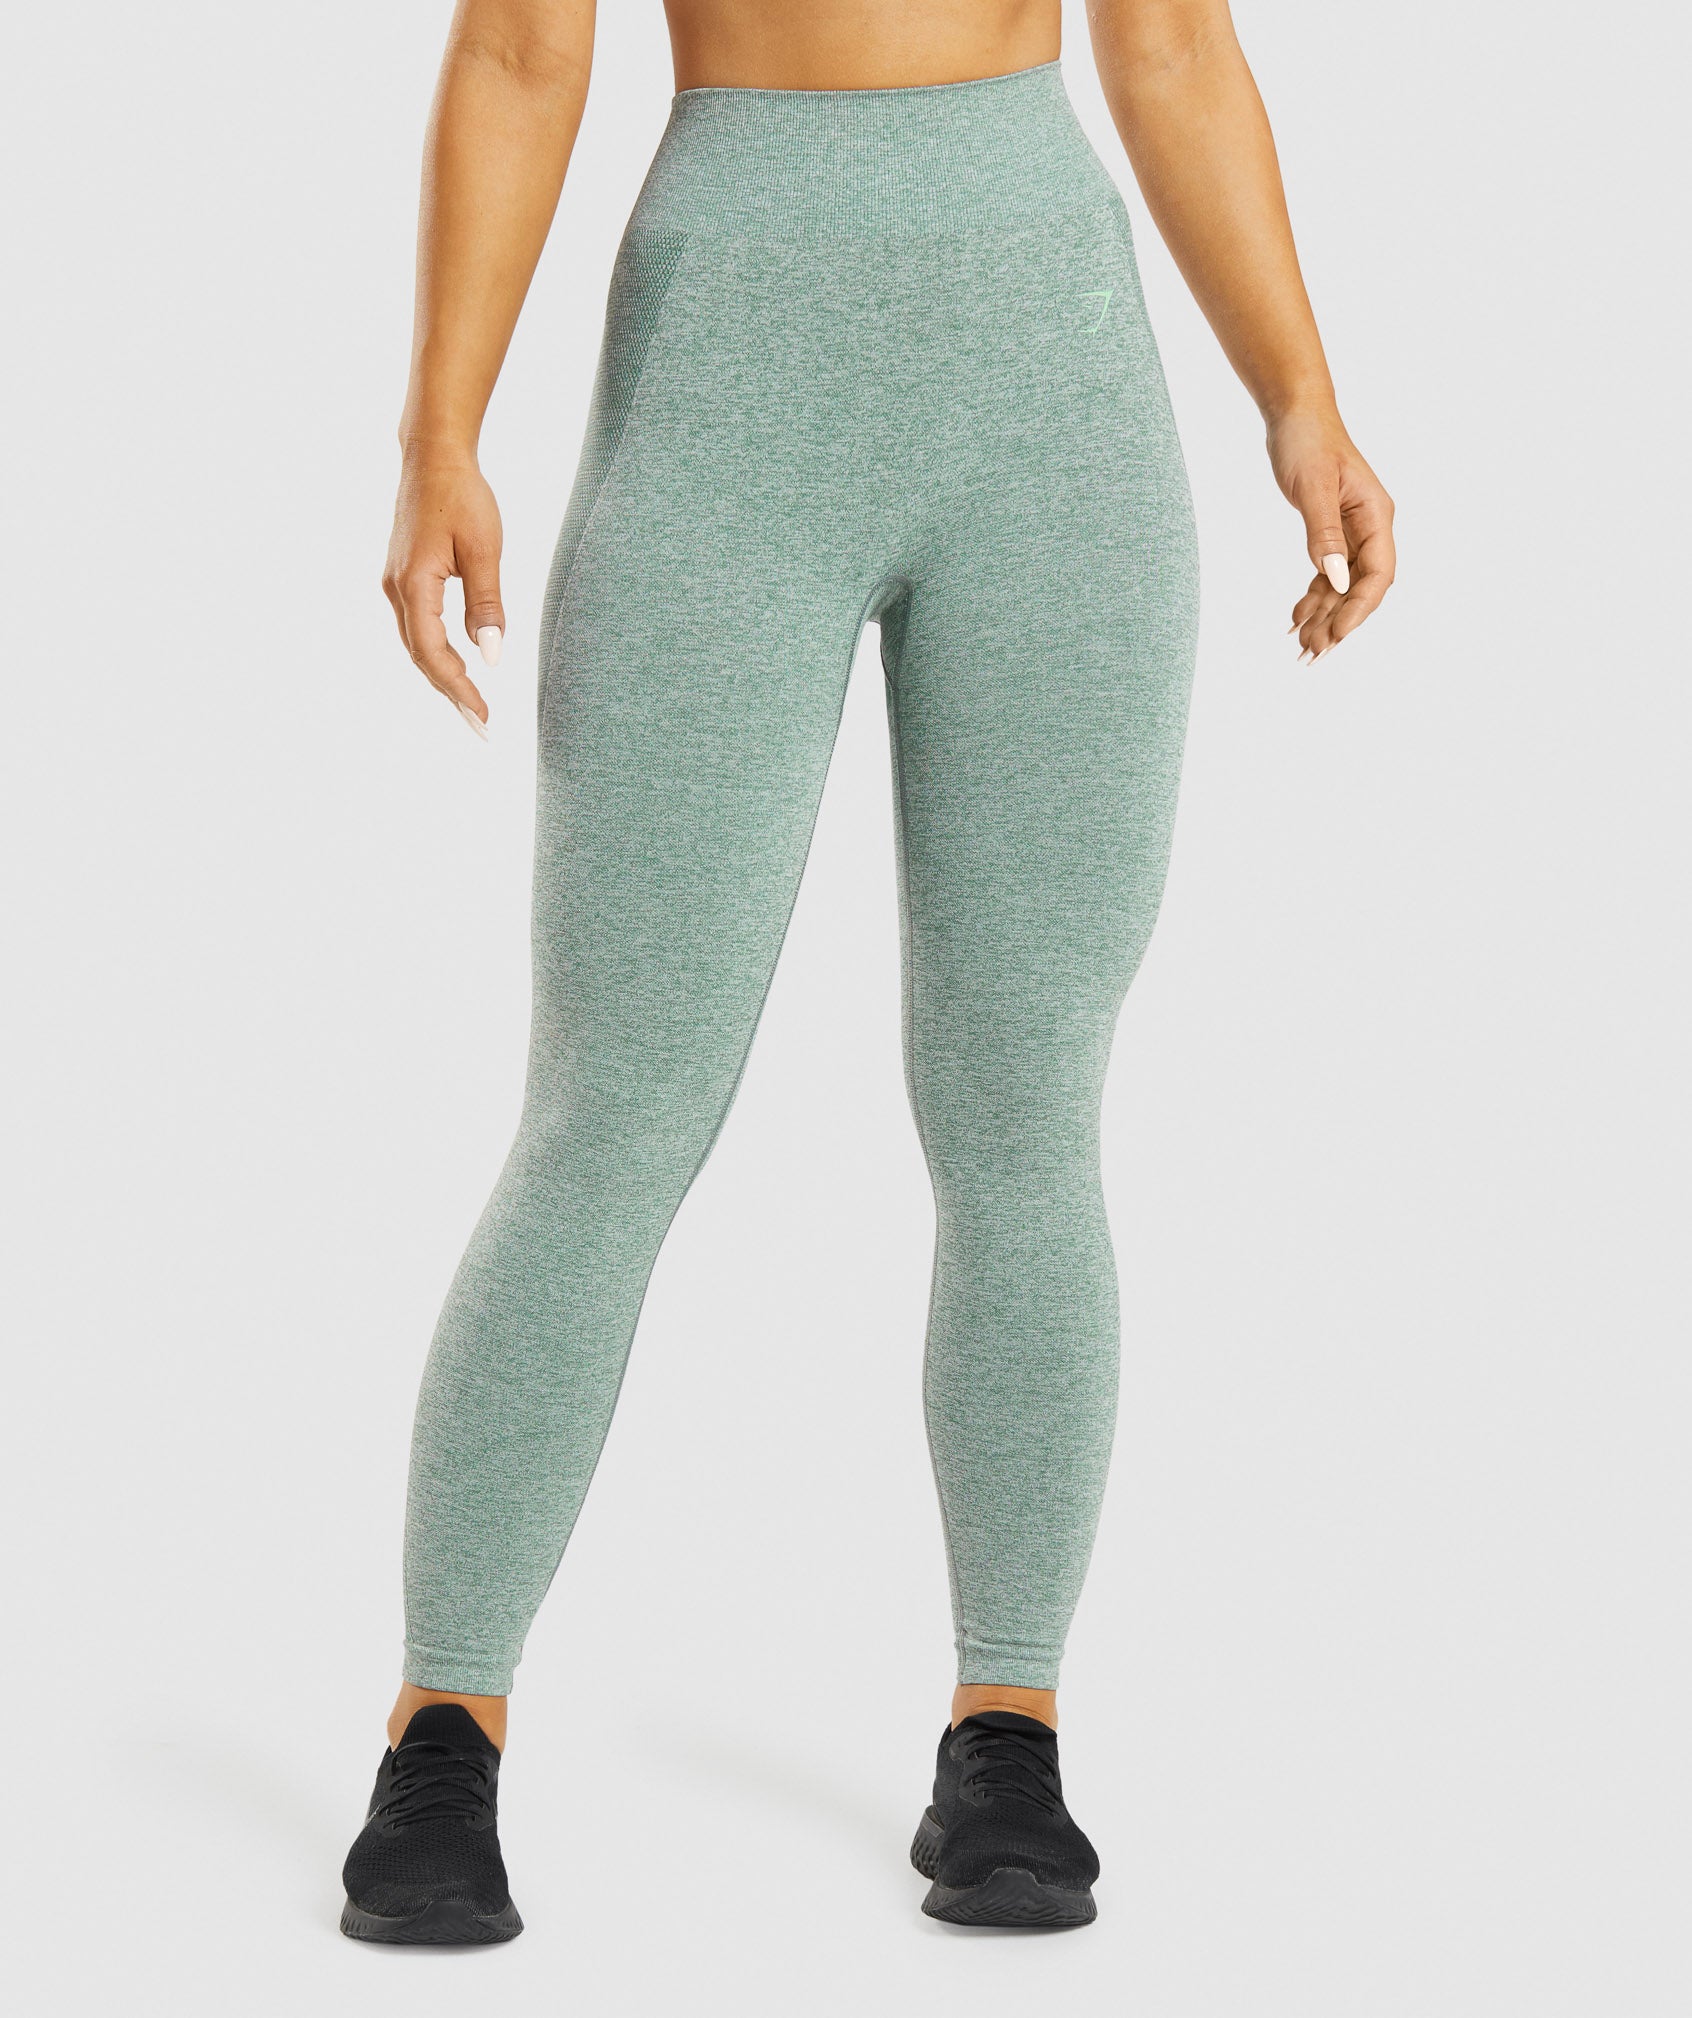 all in motion Solid Green Leggings Size XL - 37% off